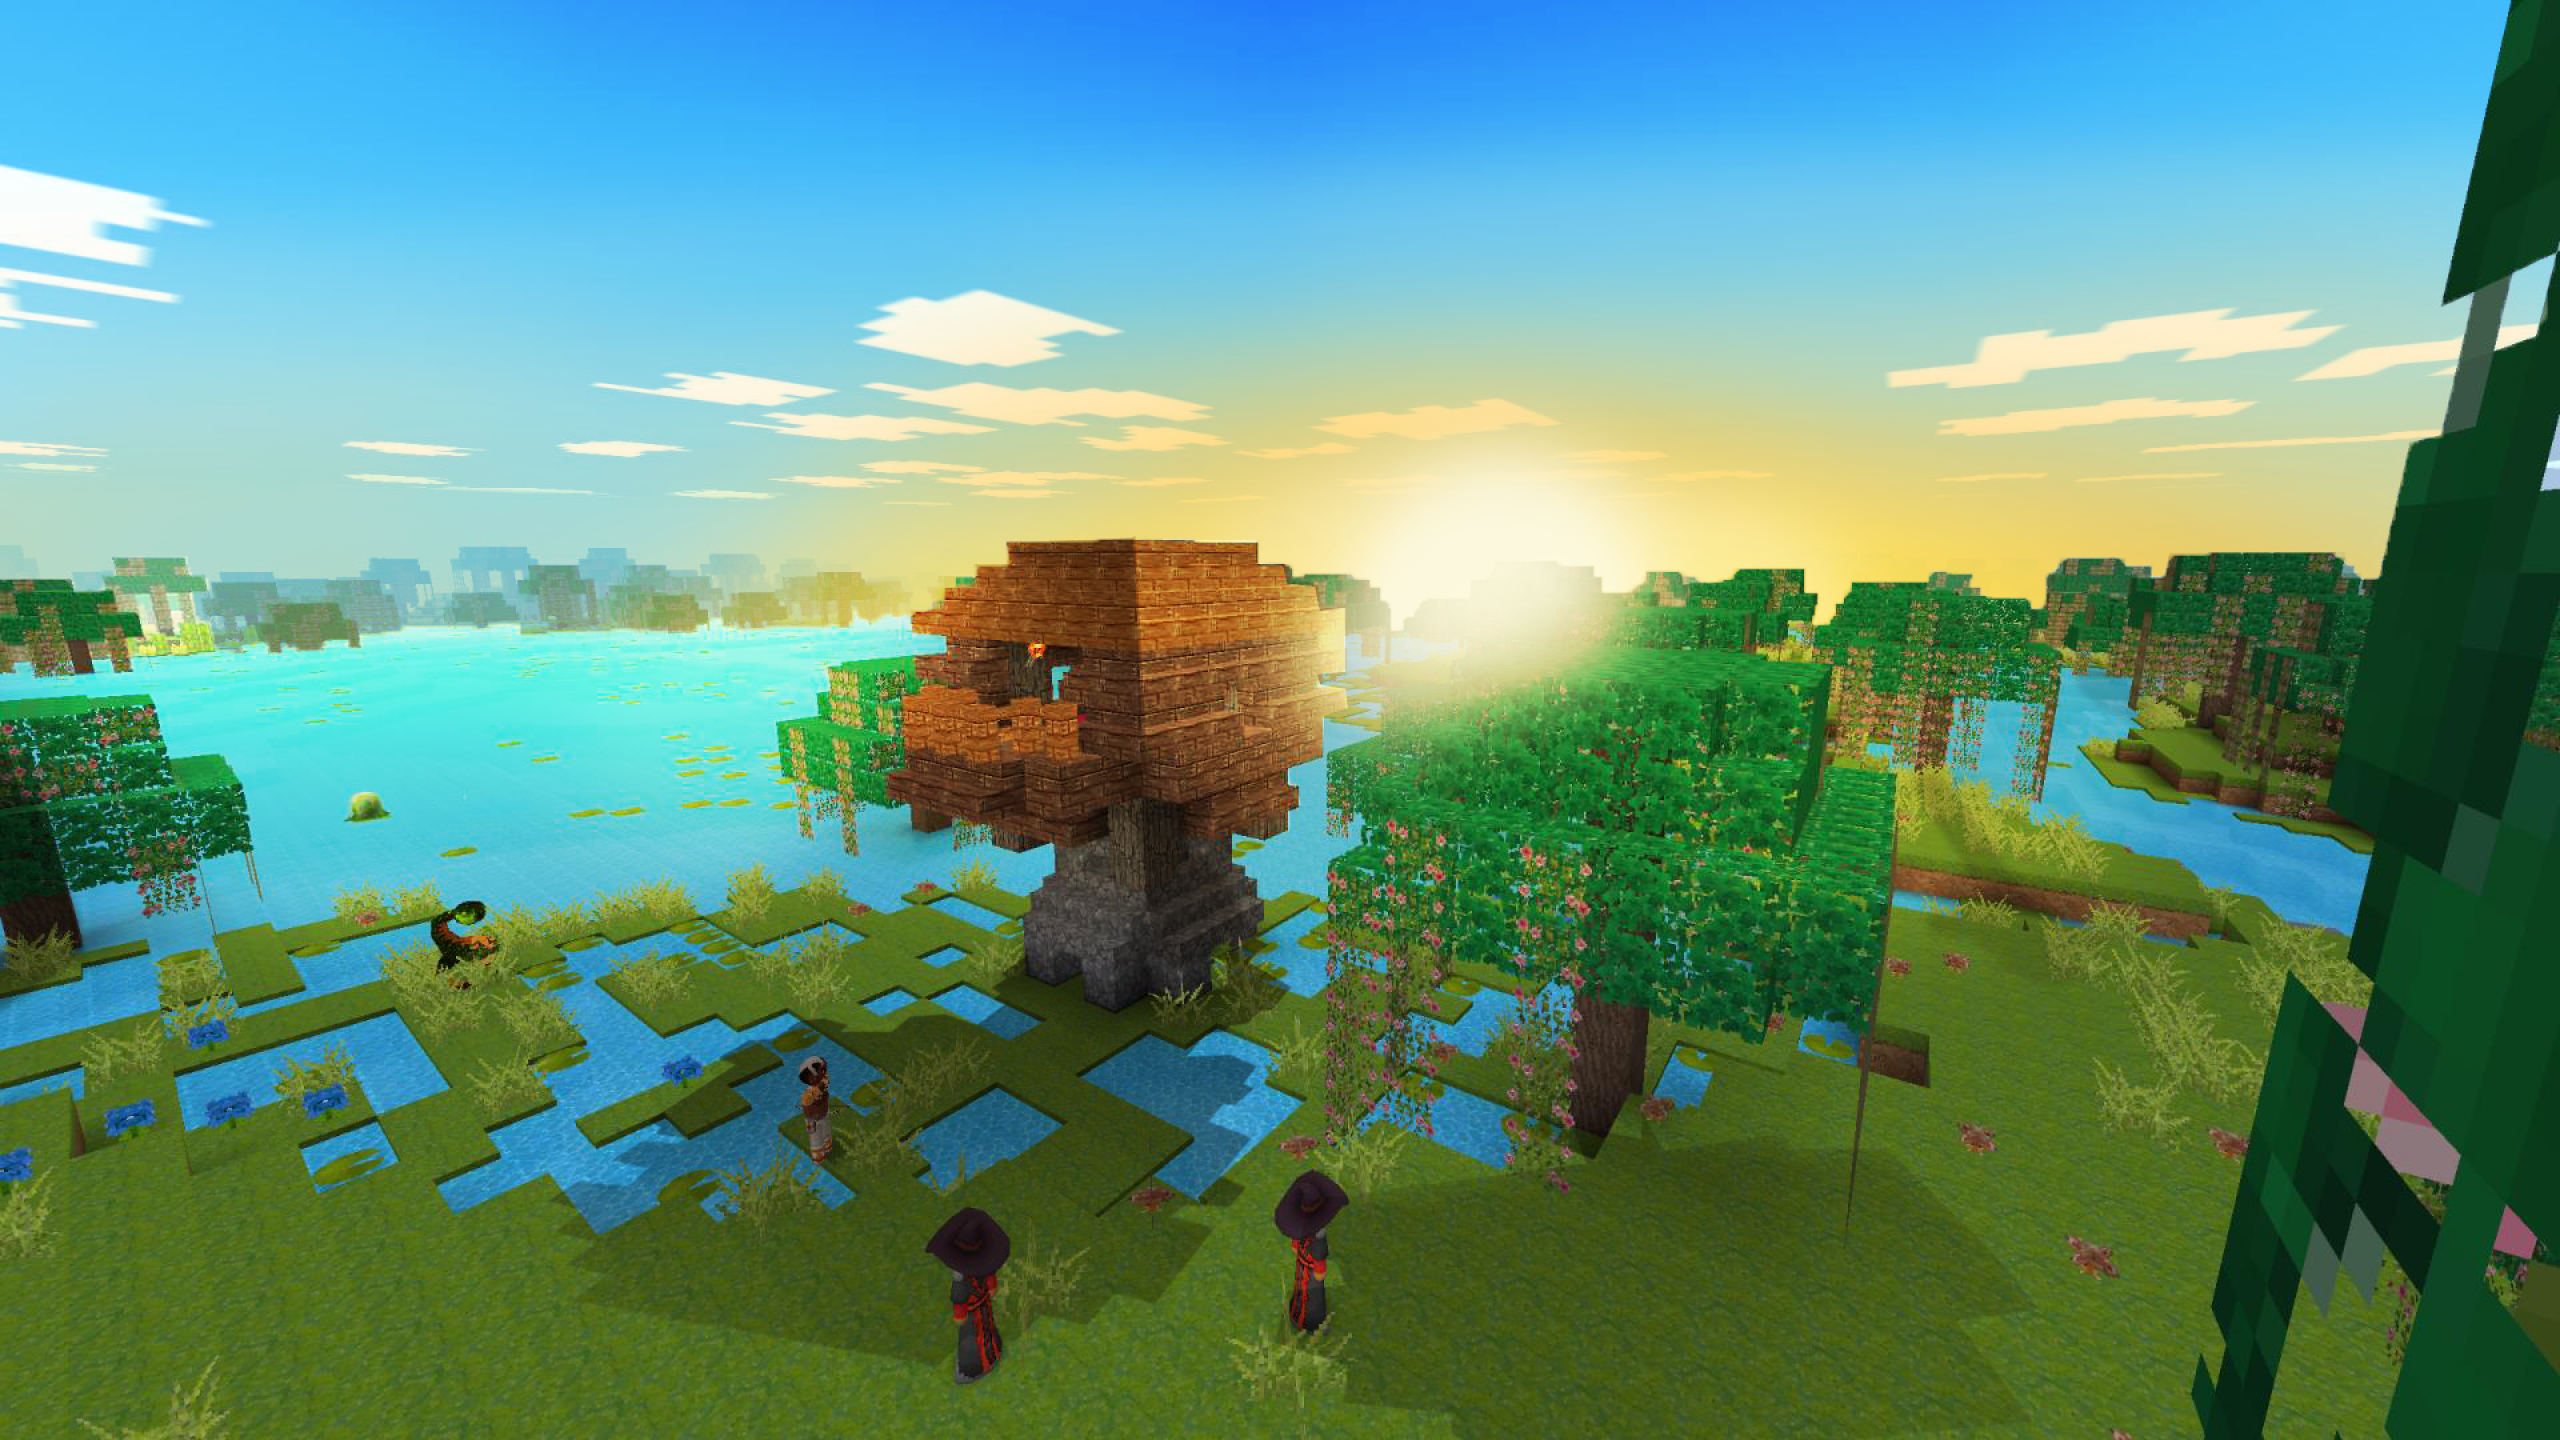 Download 2560x1440 Minecraft, Pixel Games, Survival, Clouds, Sun Wallpaper for iMac 27 inch